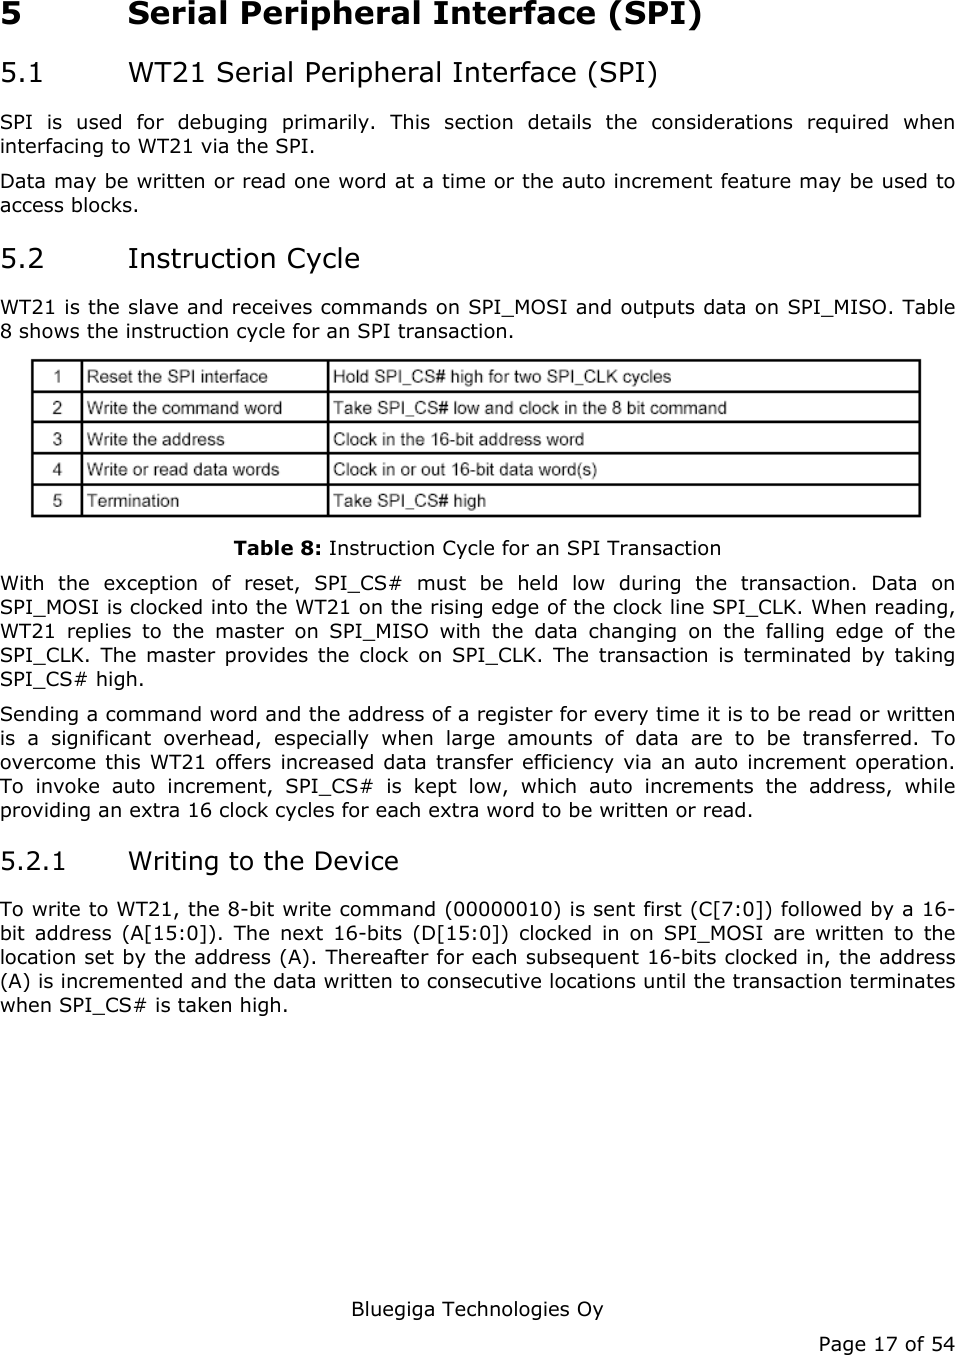   Bluegiga Technologies Oy Page 17 of 54 5 Serial Peripheral Interface (SPI) 5.1 WT21 Serial Peripheral Interface (SPI) SPI is used for debuging primarily. This section details the considerations required when interfacing to WT21 via the SPI. Data may be written or read one word at a time or the auto increment feature may be used to access blocks. 5.2 Instruction Cycle WT21 is the slave and receives commands on SPI_MOSI and outputs data on SPI_MISO. Table 8 shows the instruction cycle for an SPI transaction.  Table 8: Instruction Cycle for an SPI Transaction With the exception of reset, SPI_CS# must be held low during the transaction. Data on SPI_MOSI is clocked into the WT21 on the rising edge of the clock line SPI_CLK. When reading, WT21 replies to the master on SPI_MISO with the data changing on the falling edge of the SPI_CLK. The master provides the clock on SPI_CLK. The transaction is terminated by taking SPI_CS# high. Sending a command word and the address of a register for every time it is to be read or written is a significant overhead, especially when large amounts of data are to be transferred. To overcome this WT21 offers increased data transfer efficiency via an auto increment operation. To invoke auto increment, SPI_CS# is kept low, which auto increments the address, while providing an extra 16 clock cycles for each extra word to be written or read. 5.2.1 Writing to the Device To write to WT21, the 8-bit write command (00000010) is sent first (C[7:0]) followed by a 16-bit address (A[15:0]). The next 16-bits (D[15:0]) clocked in on SPI_MOSI are written to the location set by the address (A). Thereafter for each subsequent 16-bits clocked in, the address (A) is incremented and the data written to consecutive locations until the transaction terminates when SPI_CS# is taken high. 